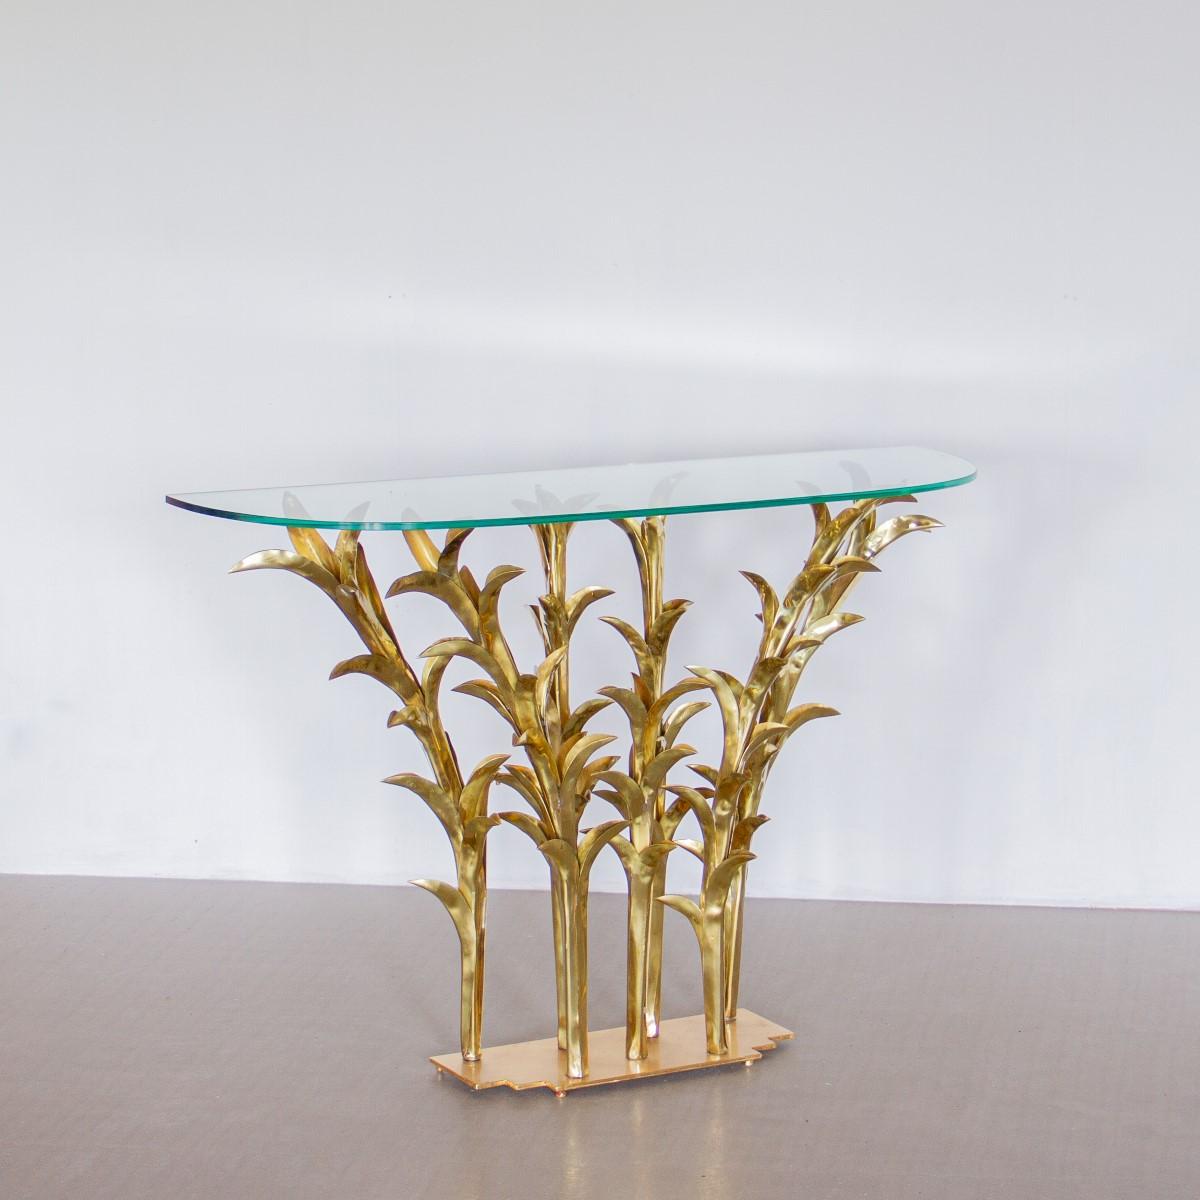 A gilded metal sculpture complete with a glass top to create a console table, titled 'Madere' created by Alain Chervet in 1992, Signed and dated.

Alain Chervet (1944) is a reclusive, French contemporary artist whose main works include Flora and